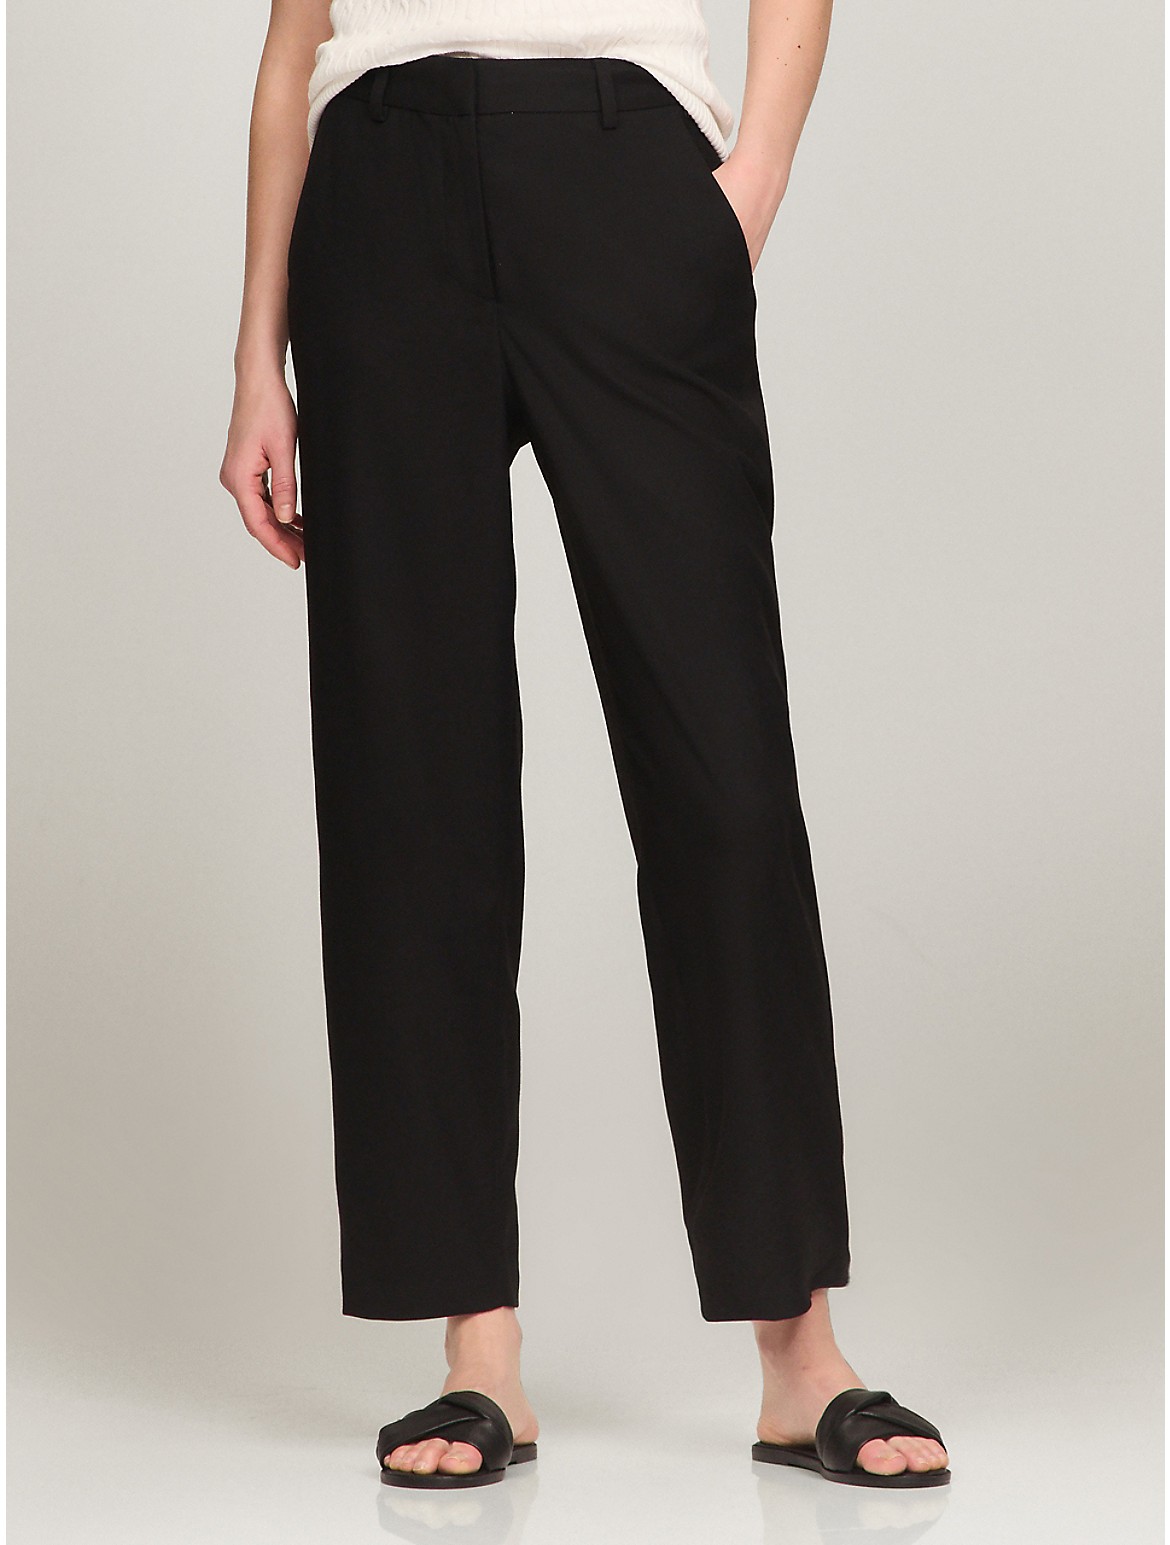 Tommy Hilfiger Women's Tapered Fit Pant